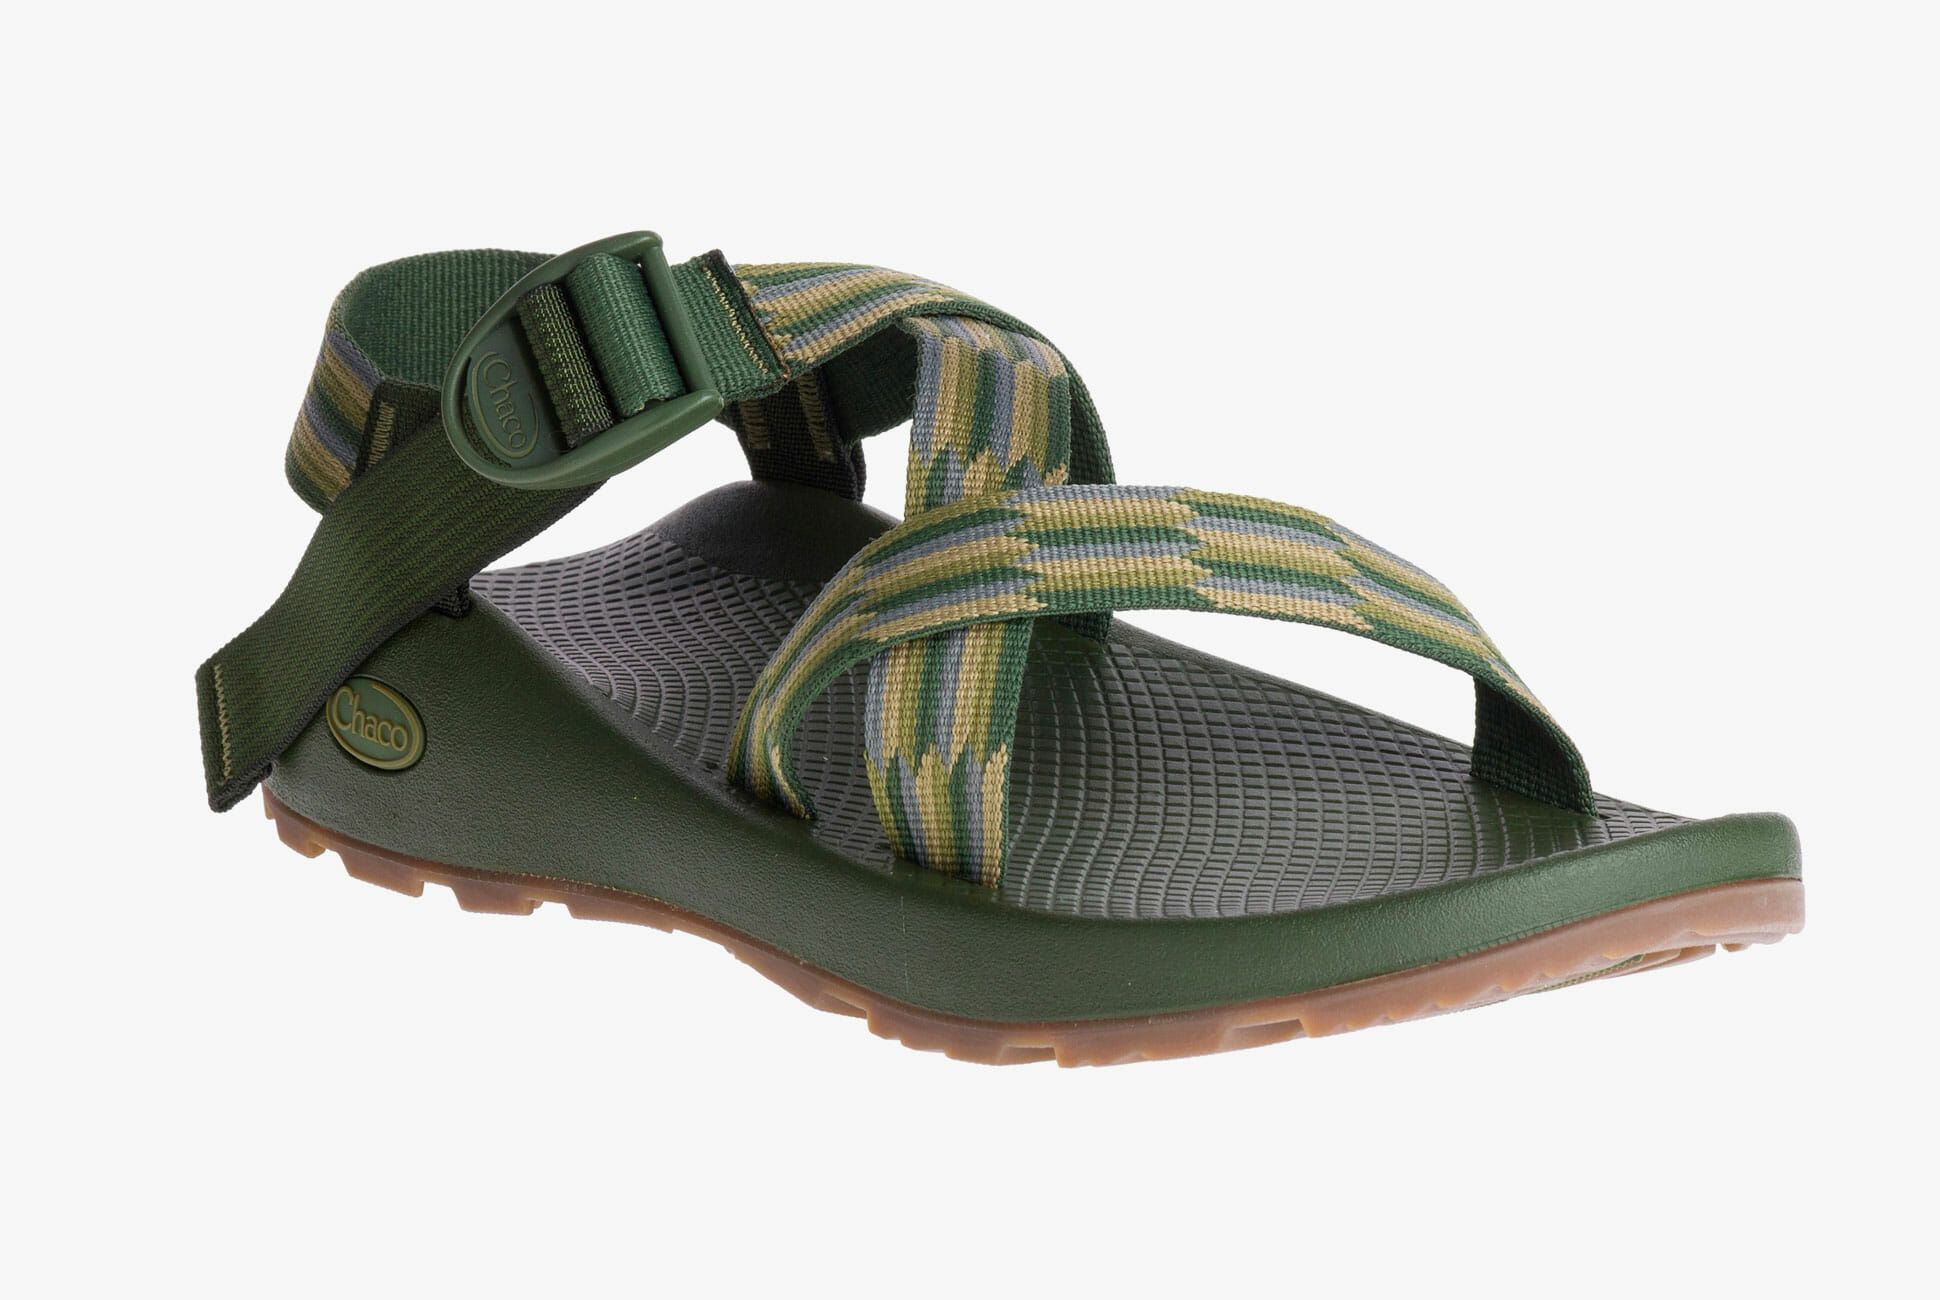 Chance to Snag New Summer Sandals 